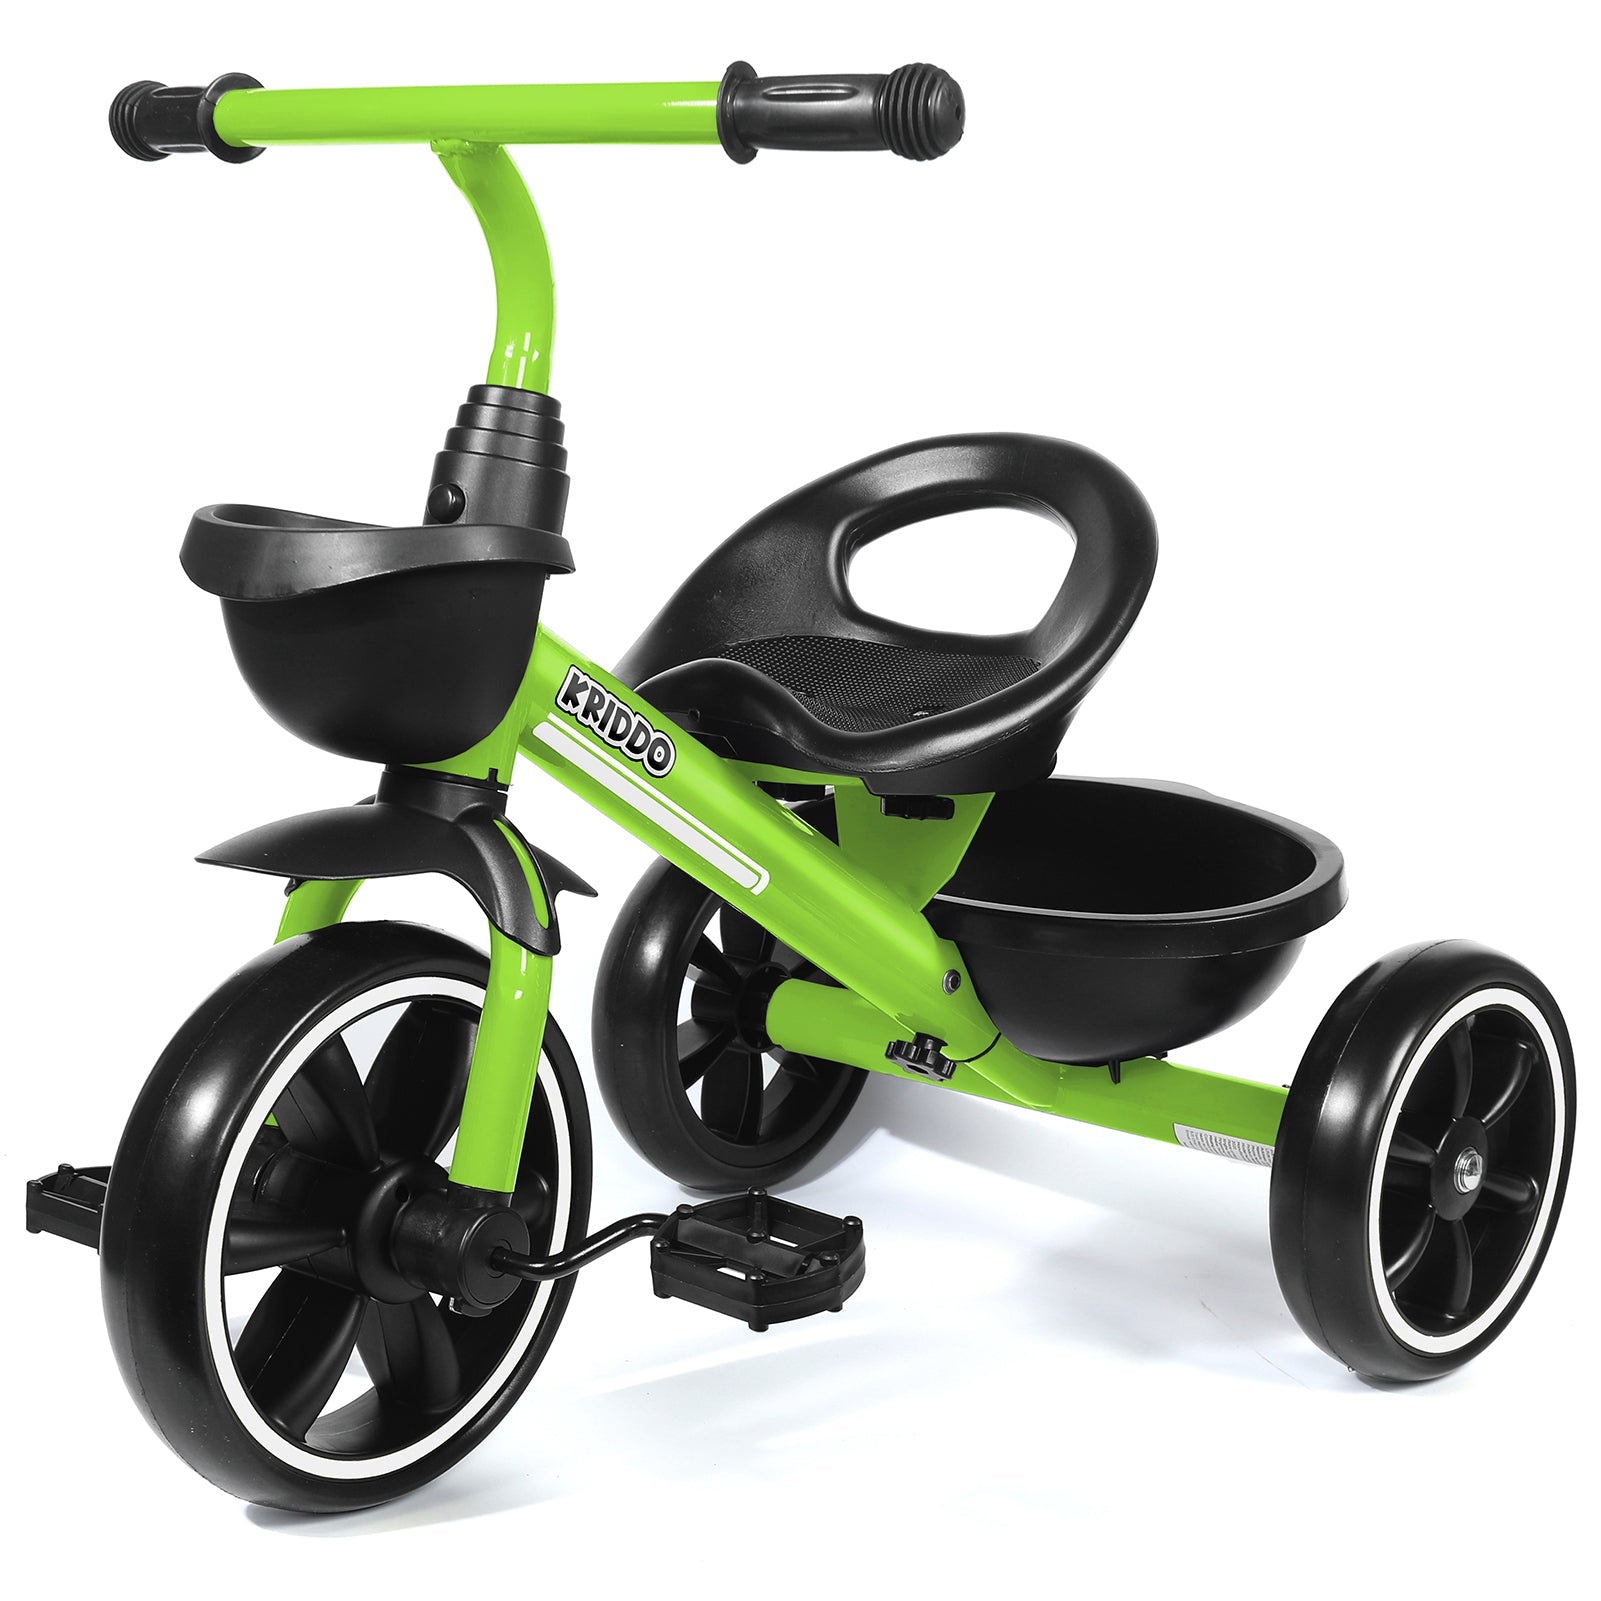 KRIDDO Kids Tricycles for 2-5 Years, Gift Toddler Tricycles for 2-5 Year Olds, Easy Assembly, Green